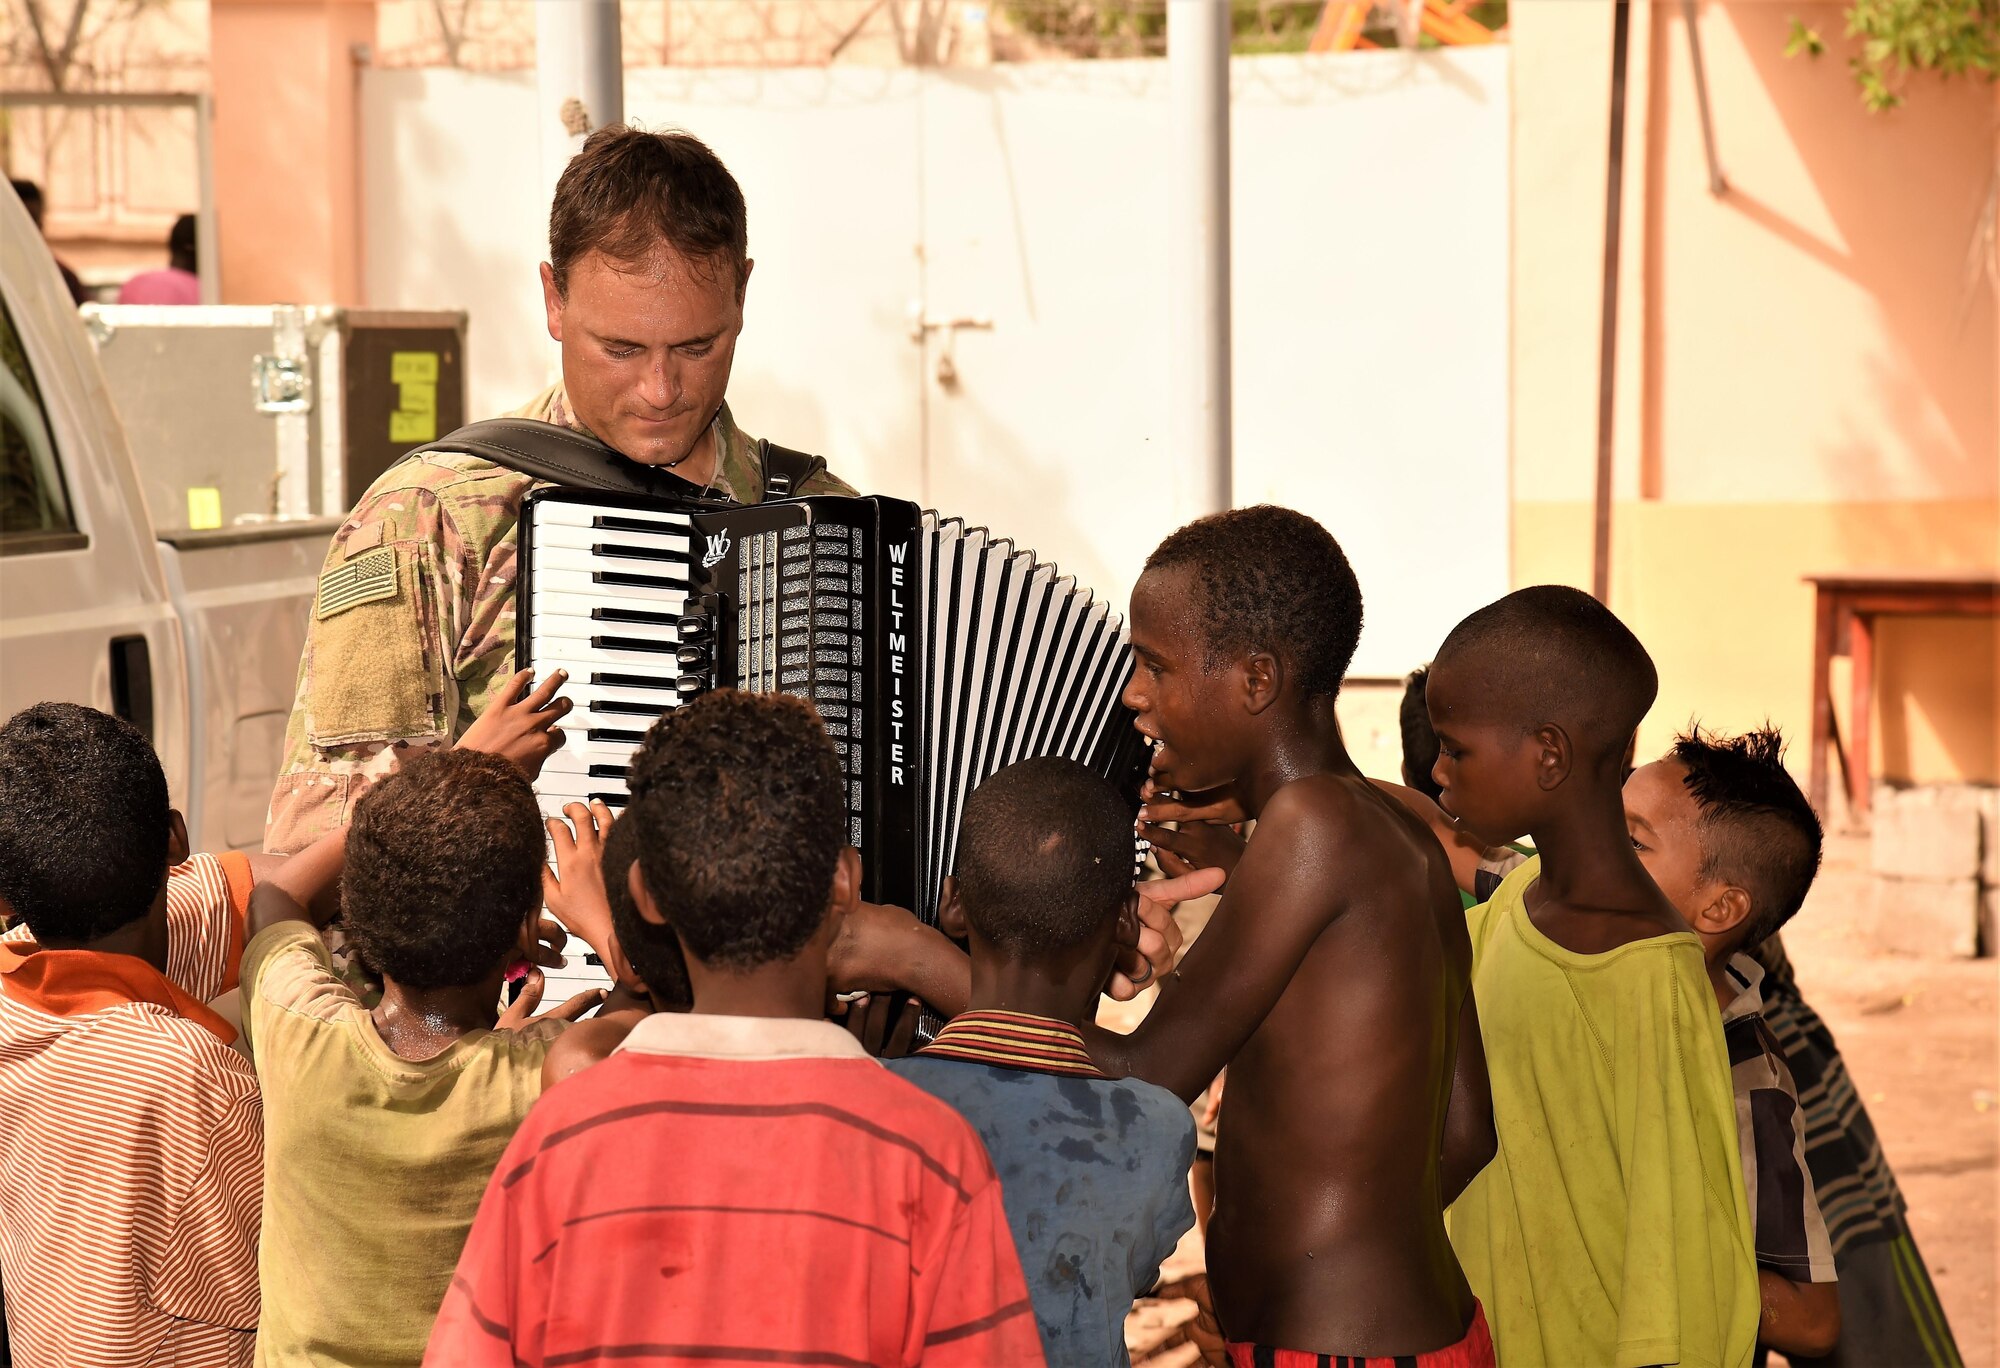 Airman 1st Class Anneke Bentley, U.S. Air Forces Central Command Band vocalist, sings and dances with a child from Caritas Djibouti while Airman 1st Class Joshua Dick, AFCENT Band percussionist, and Tech. Sgt. Joshua Holdridge, AFCENT Band bass player, accompany her in Djibouti City, June 6, 2017. The AFCENT Band, Starlifter, is based in Al Udeid Air Base, Qatar, and has a mission of performing and touring in small ensembles to positively promote troop morale, diplomacy and outreach to host nation communities. (U.S. Air National Guard photo by Tech. Sgt. Andria Allmond)